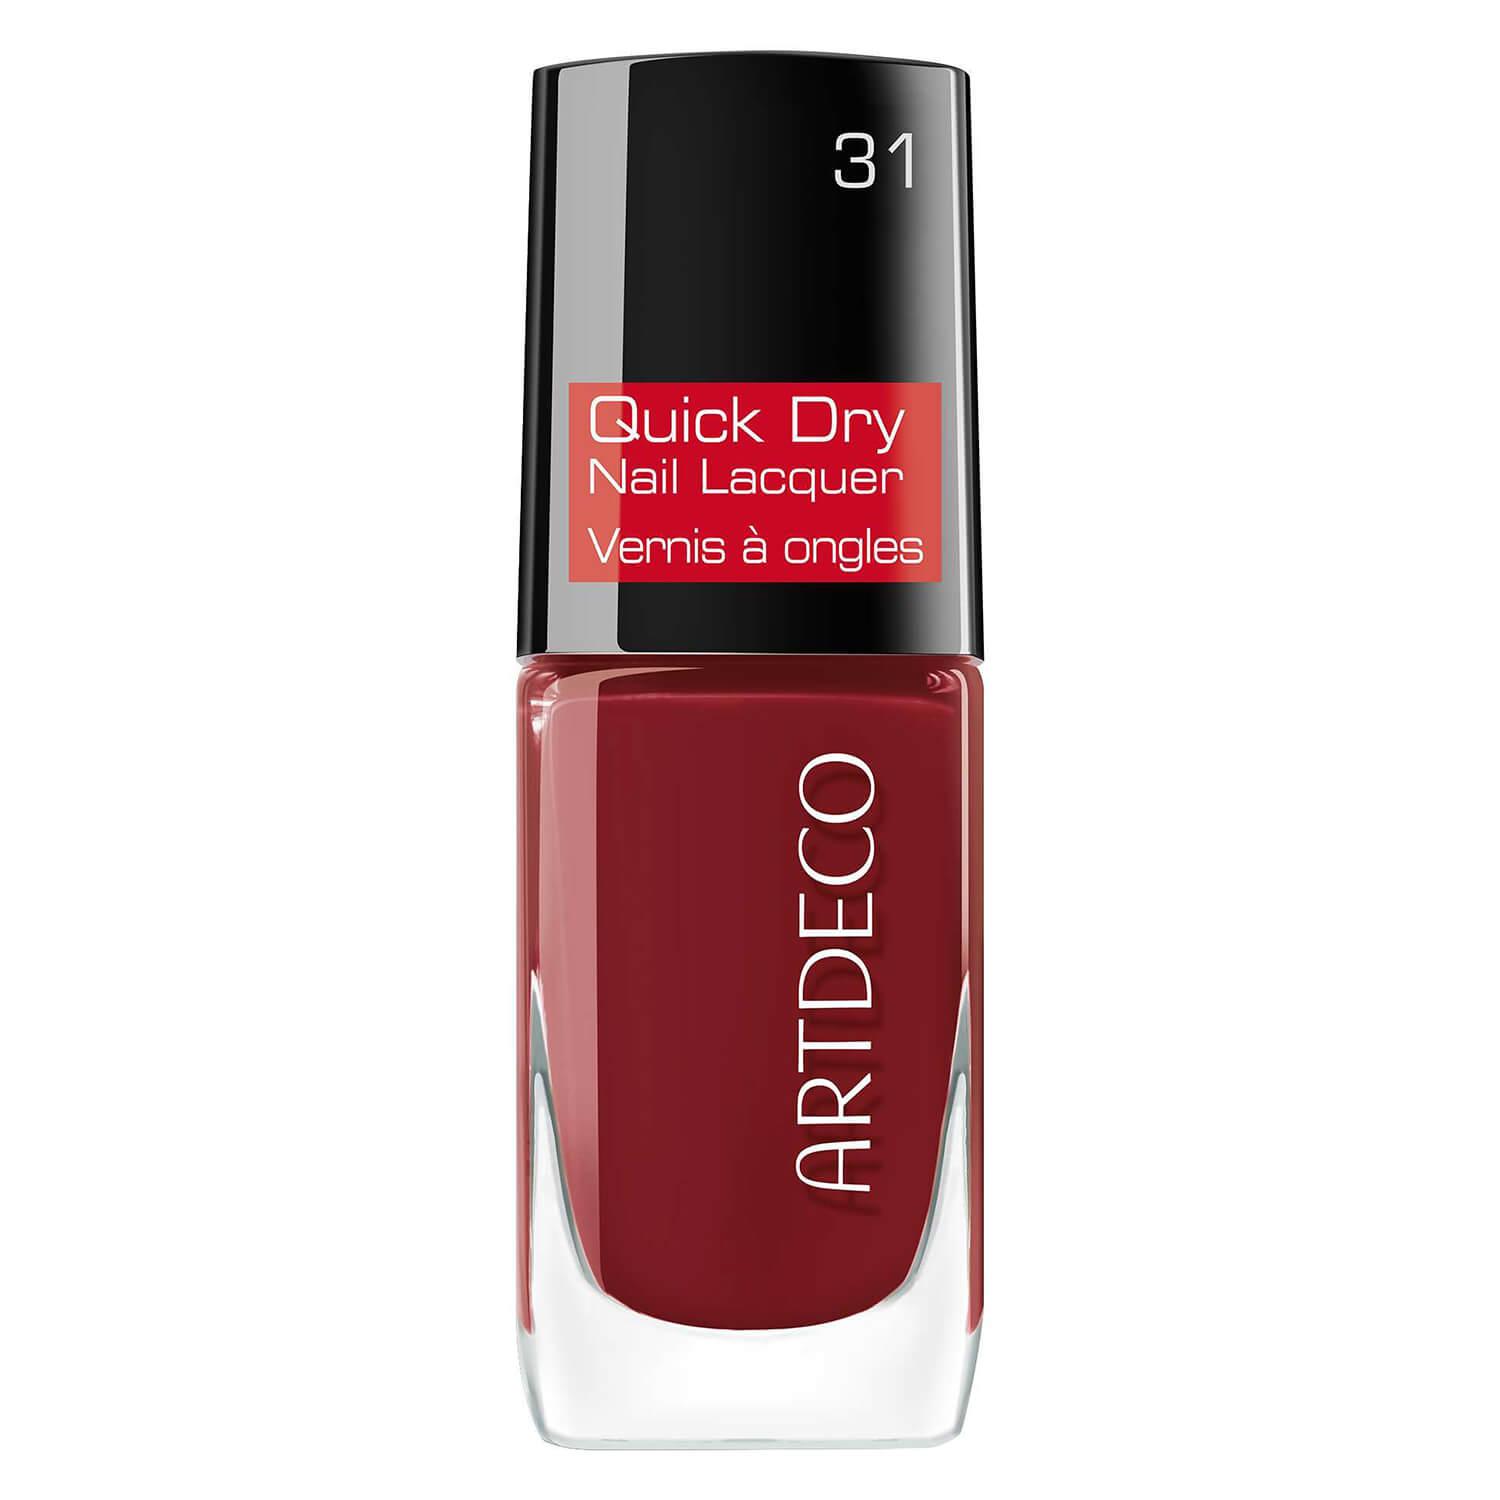 Quick Dry Nail Lacquer Confident Red 31